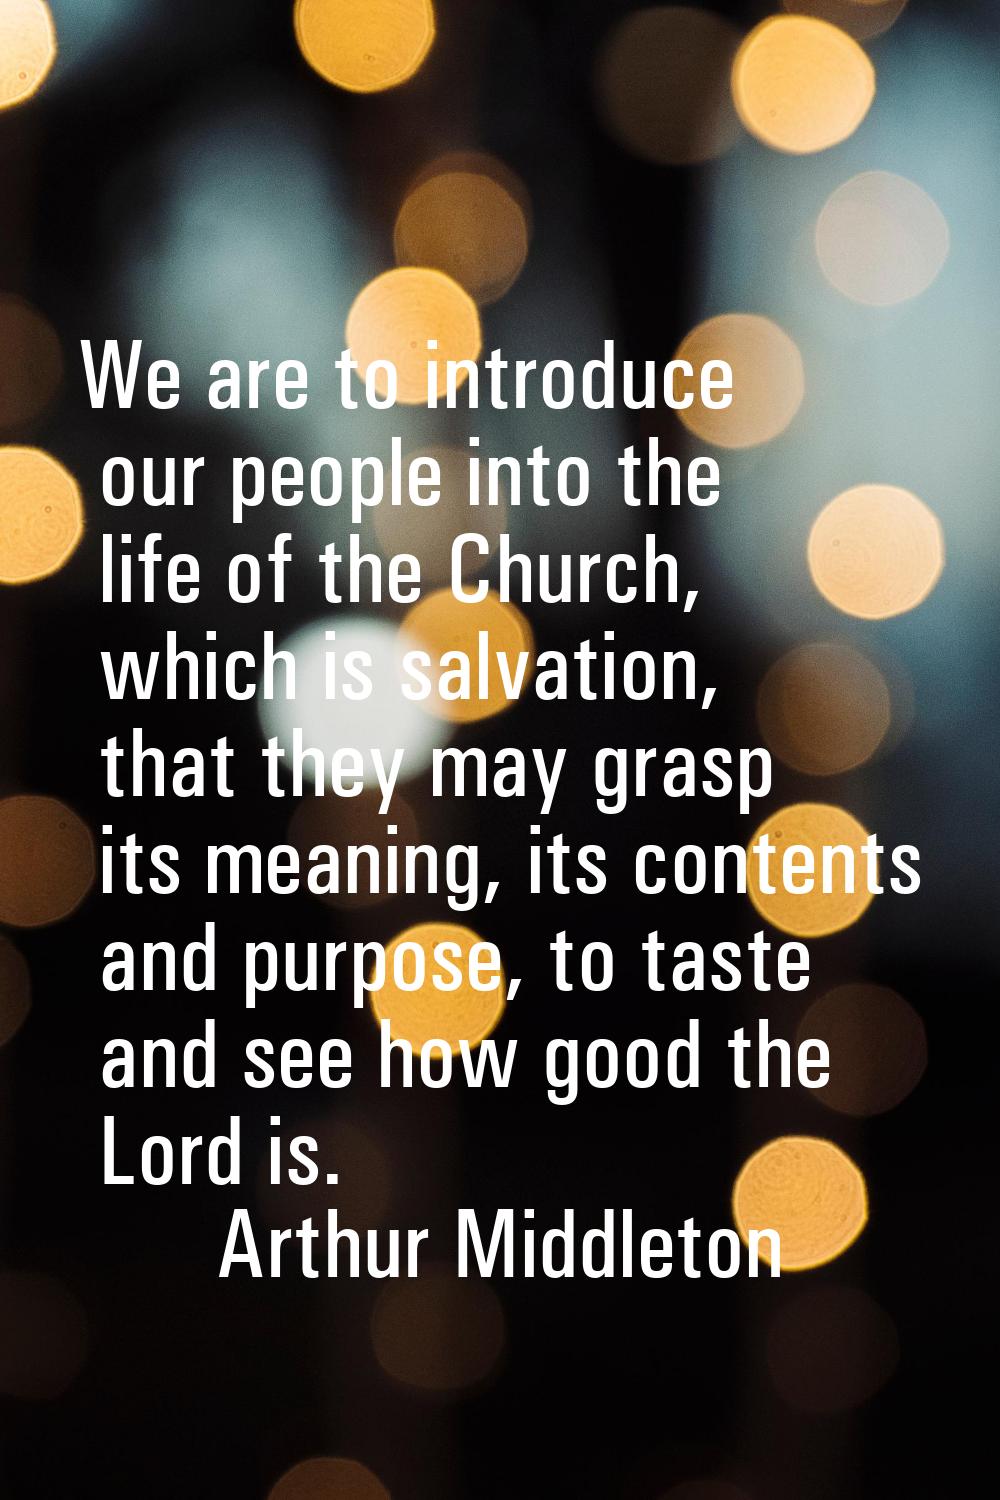 We are to introduce our people into the life of the Church, which is salvation, that they may grasp